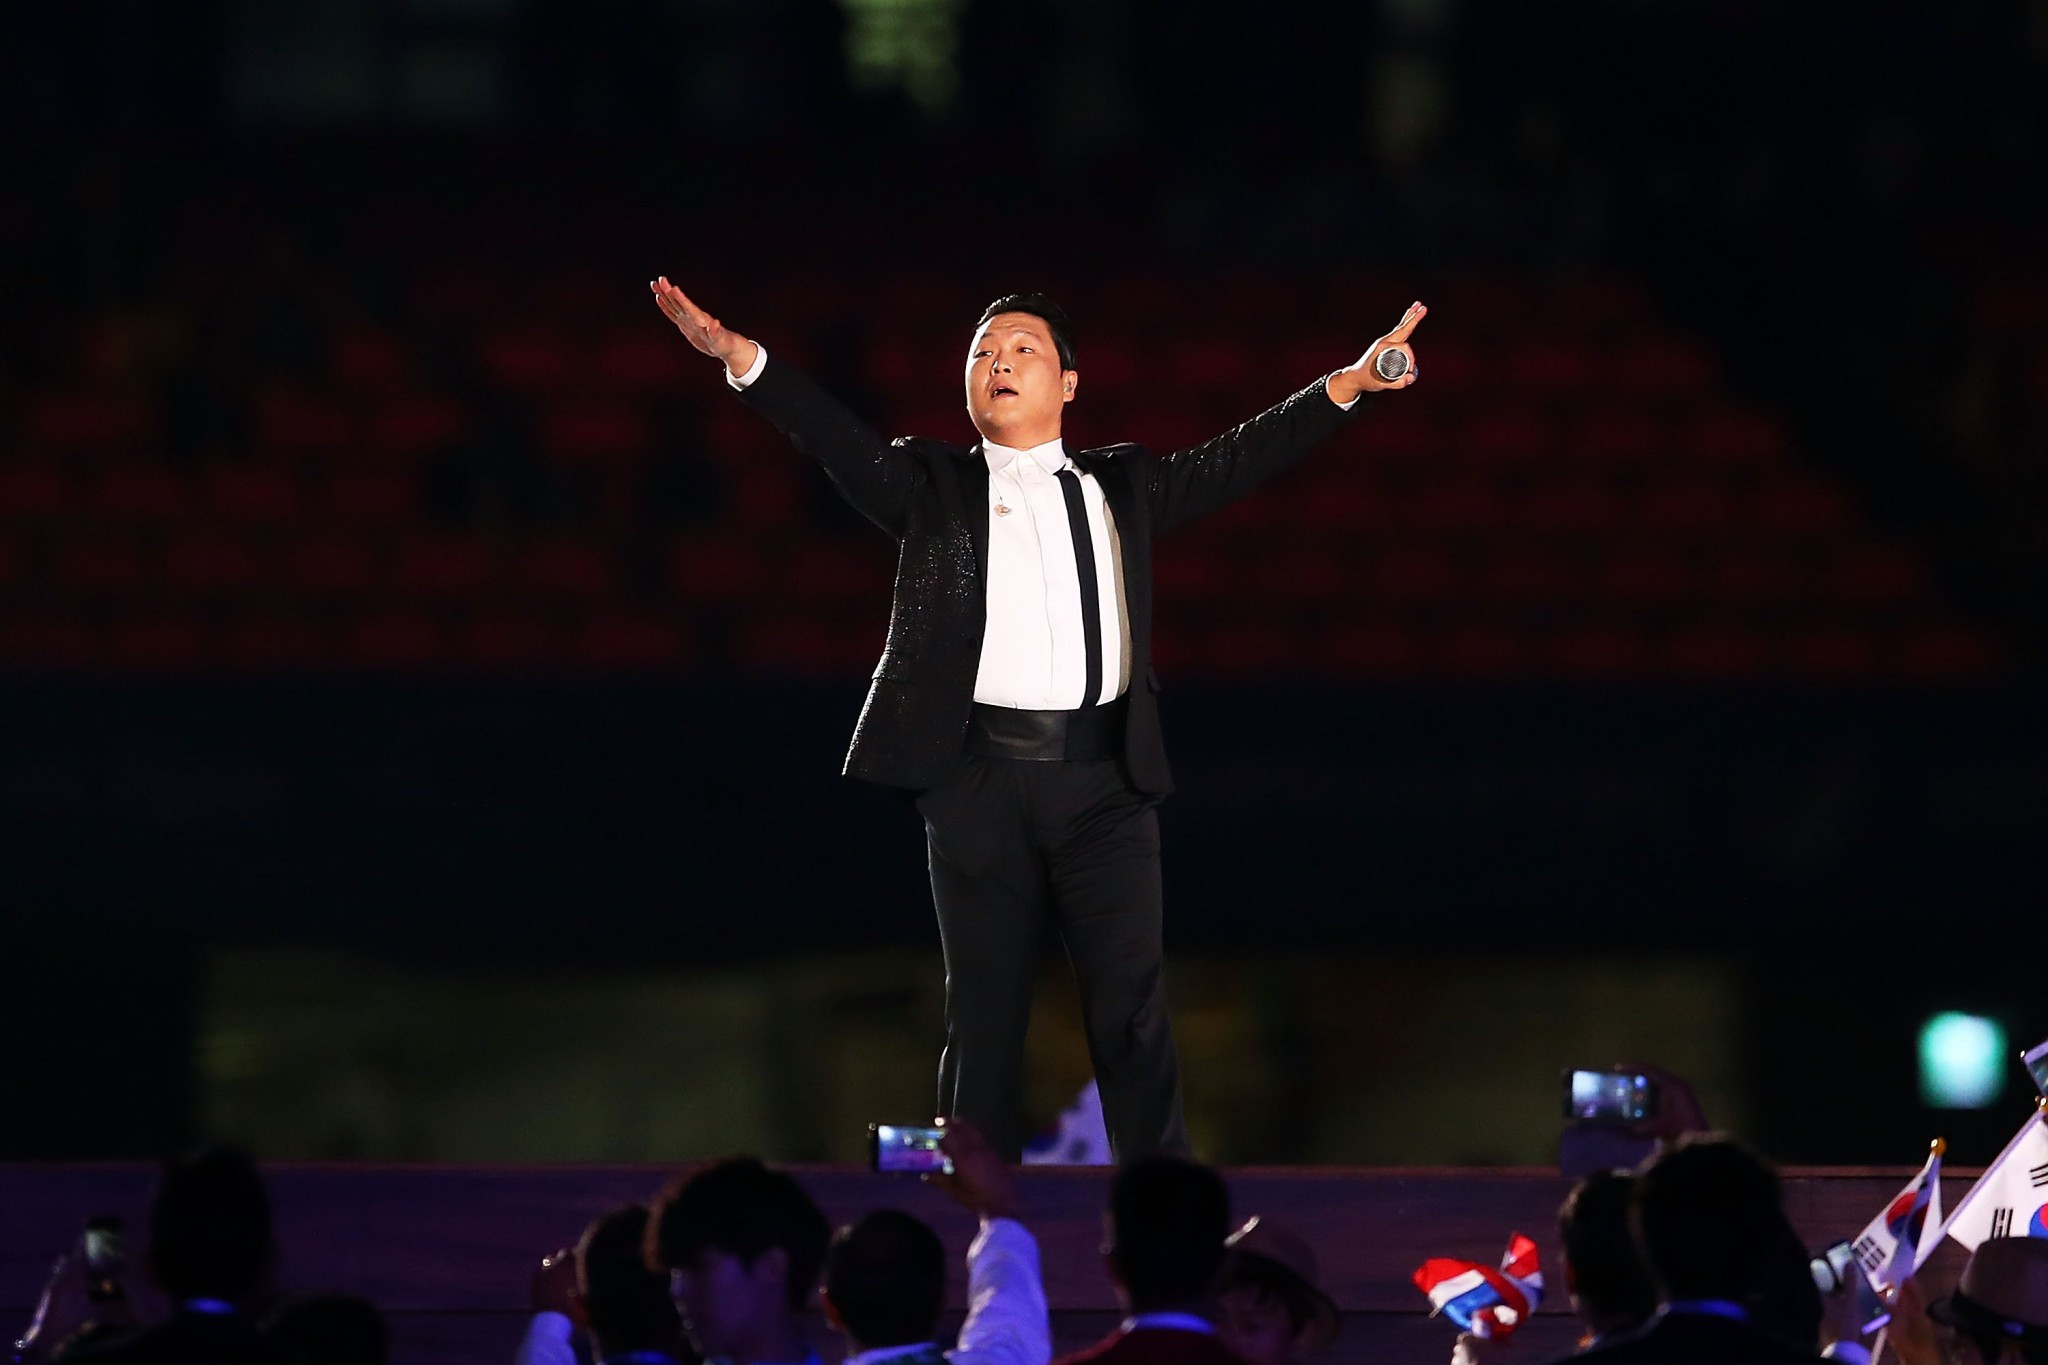 Engaging Gangnam Style singer DJ Psy may be a good way of promoting Pyeongchang 2018 ©Getty Images